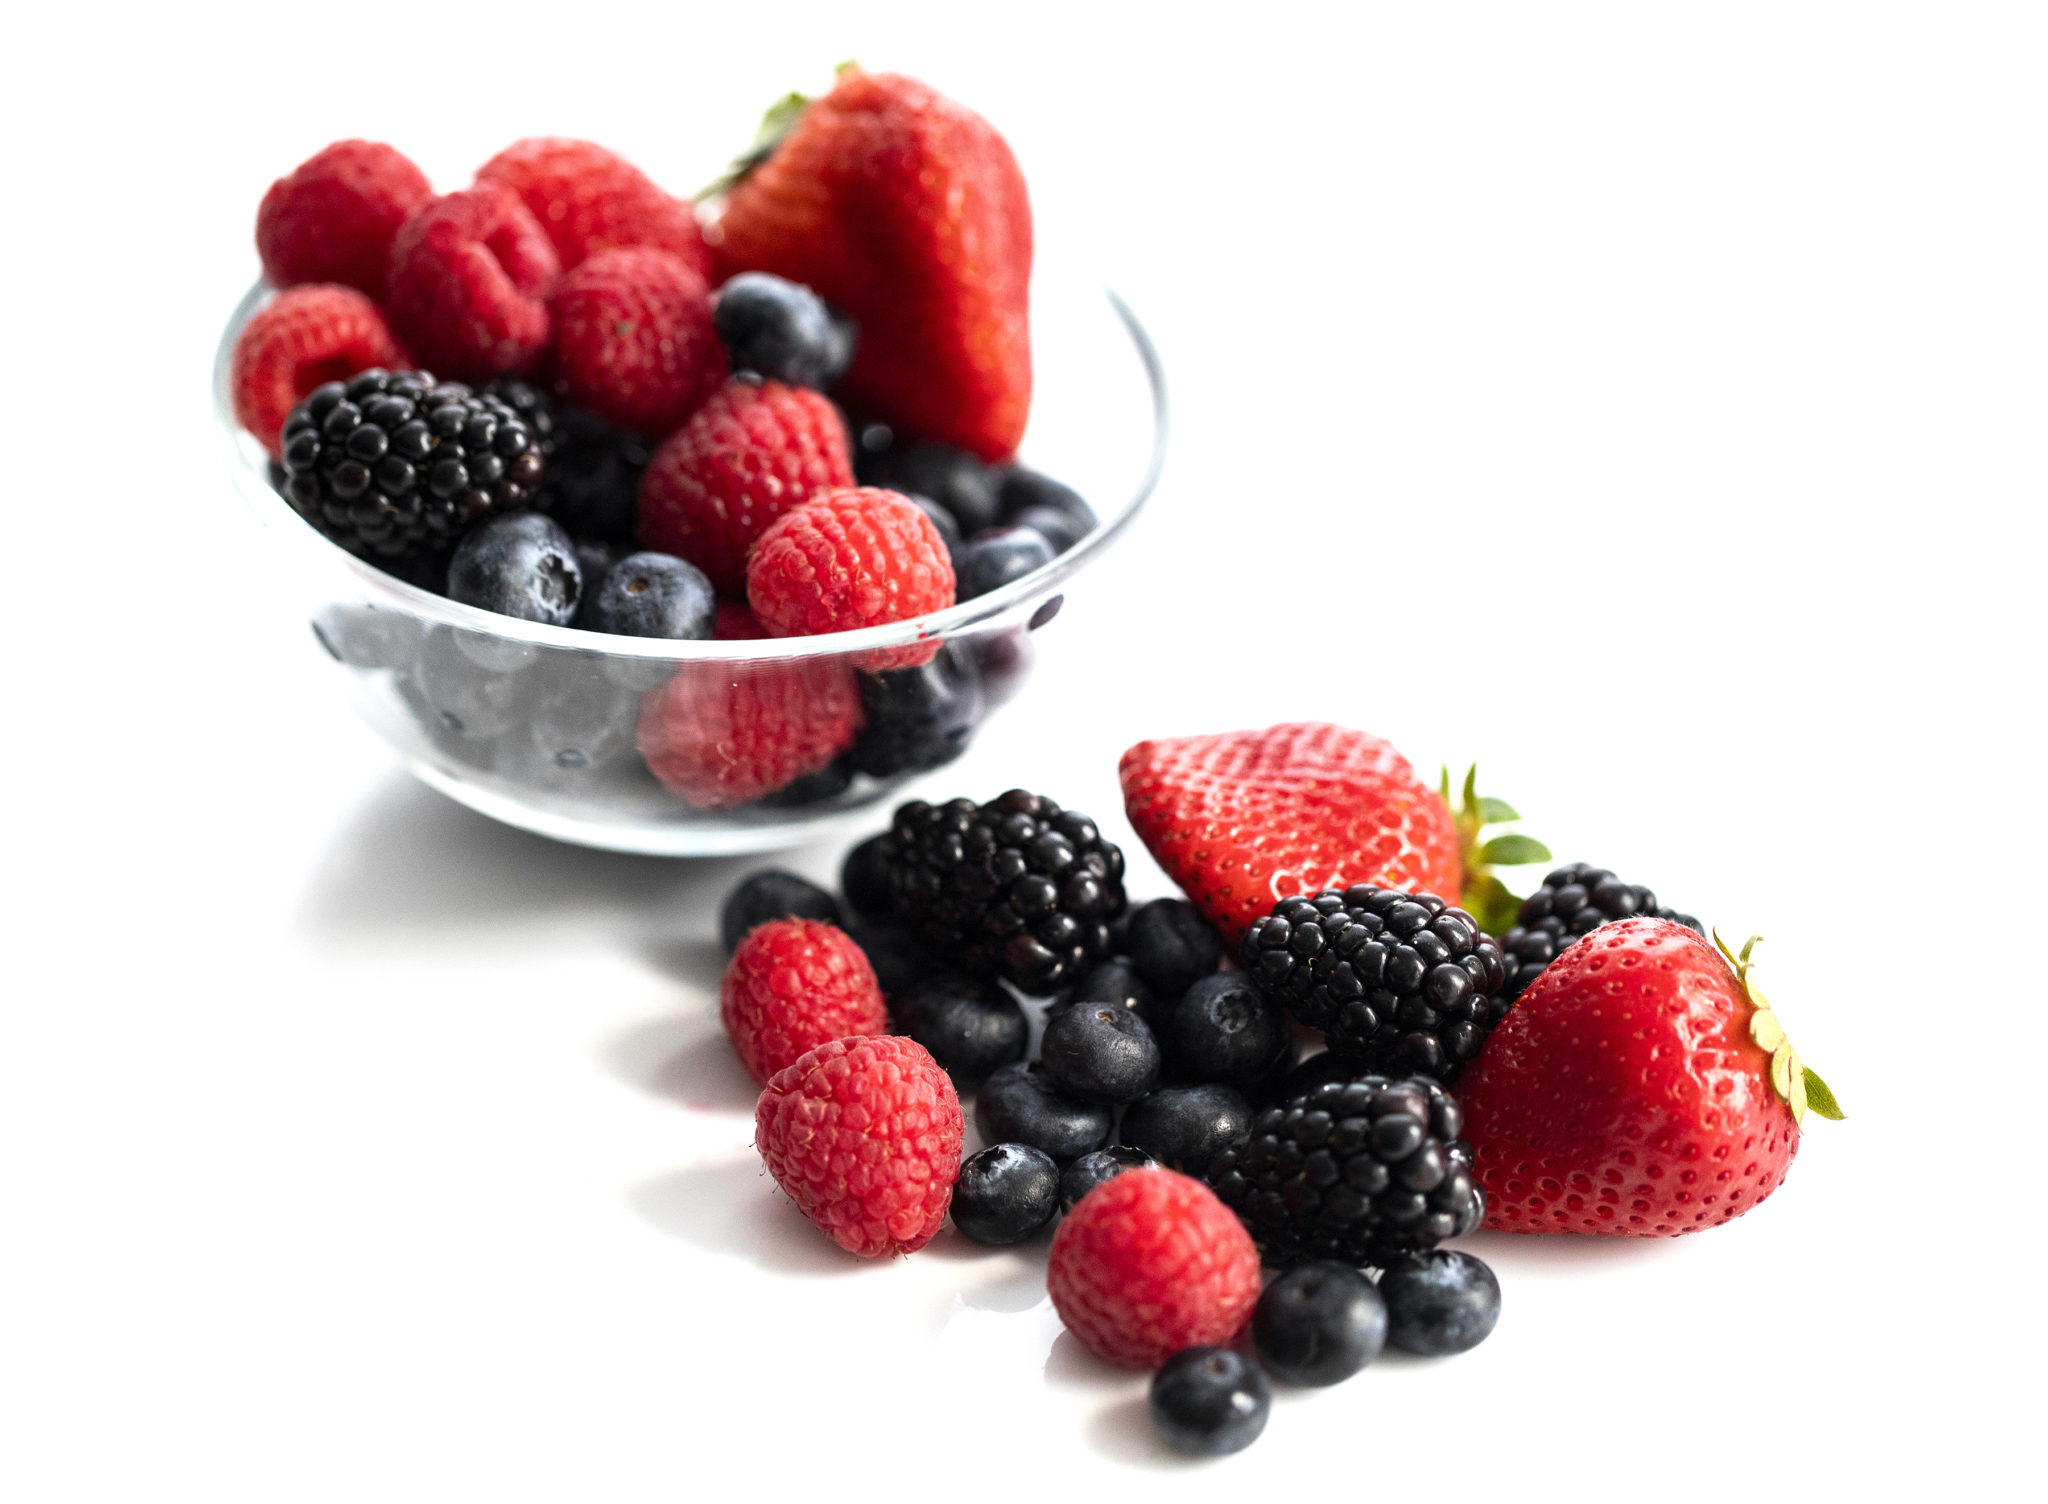 Better antioxidants give you better protection from free radicals